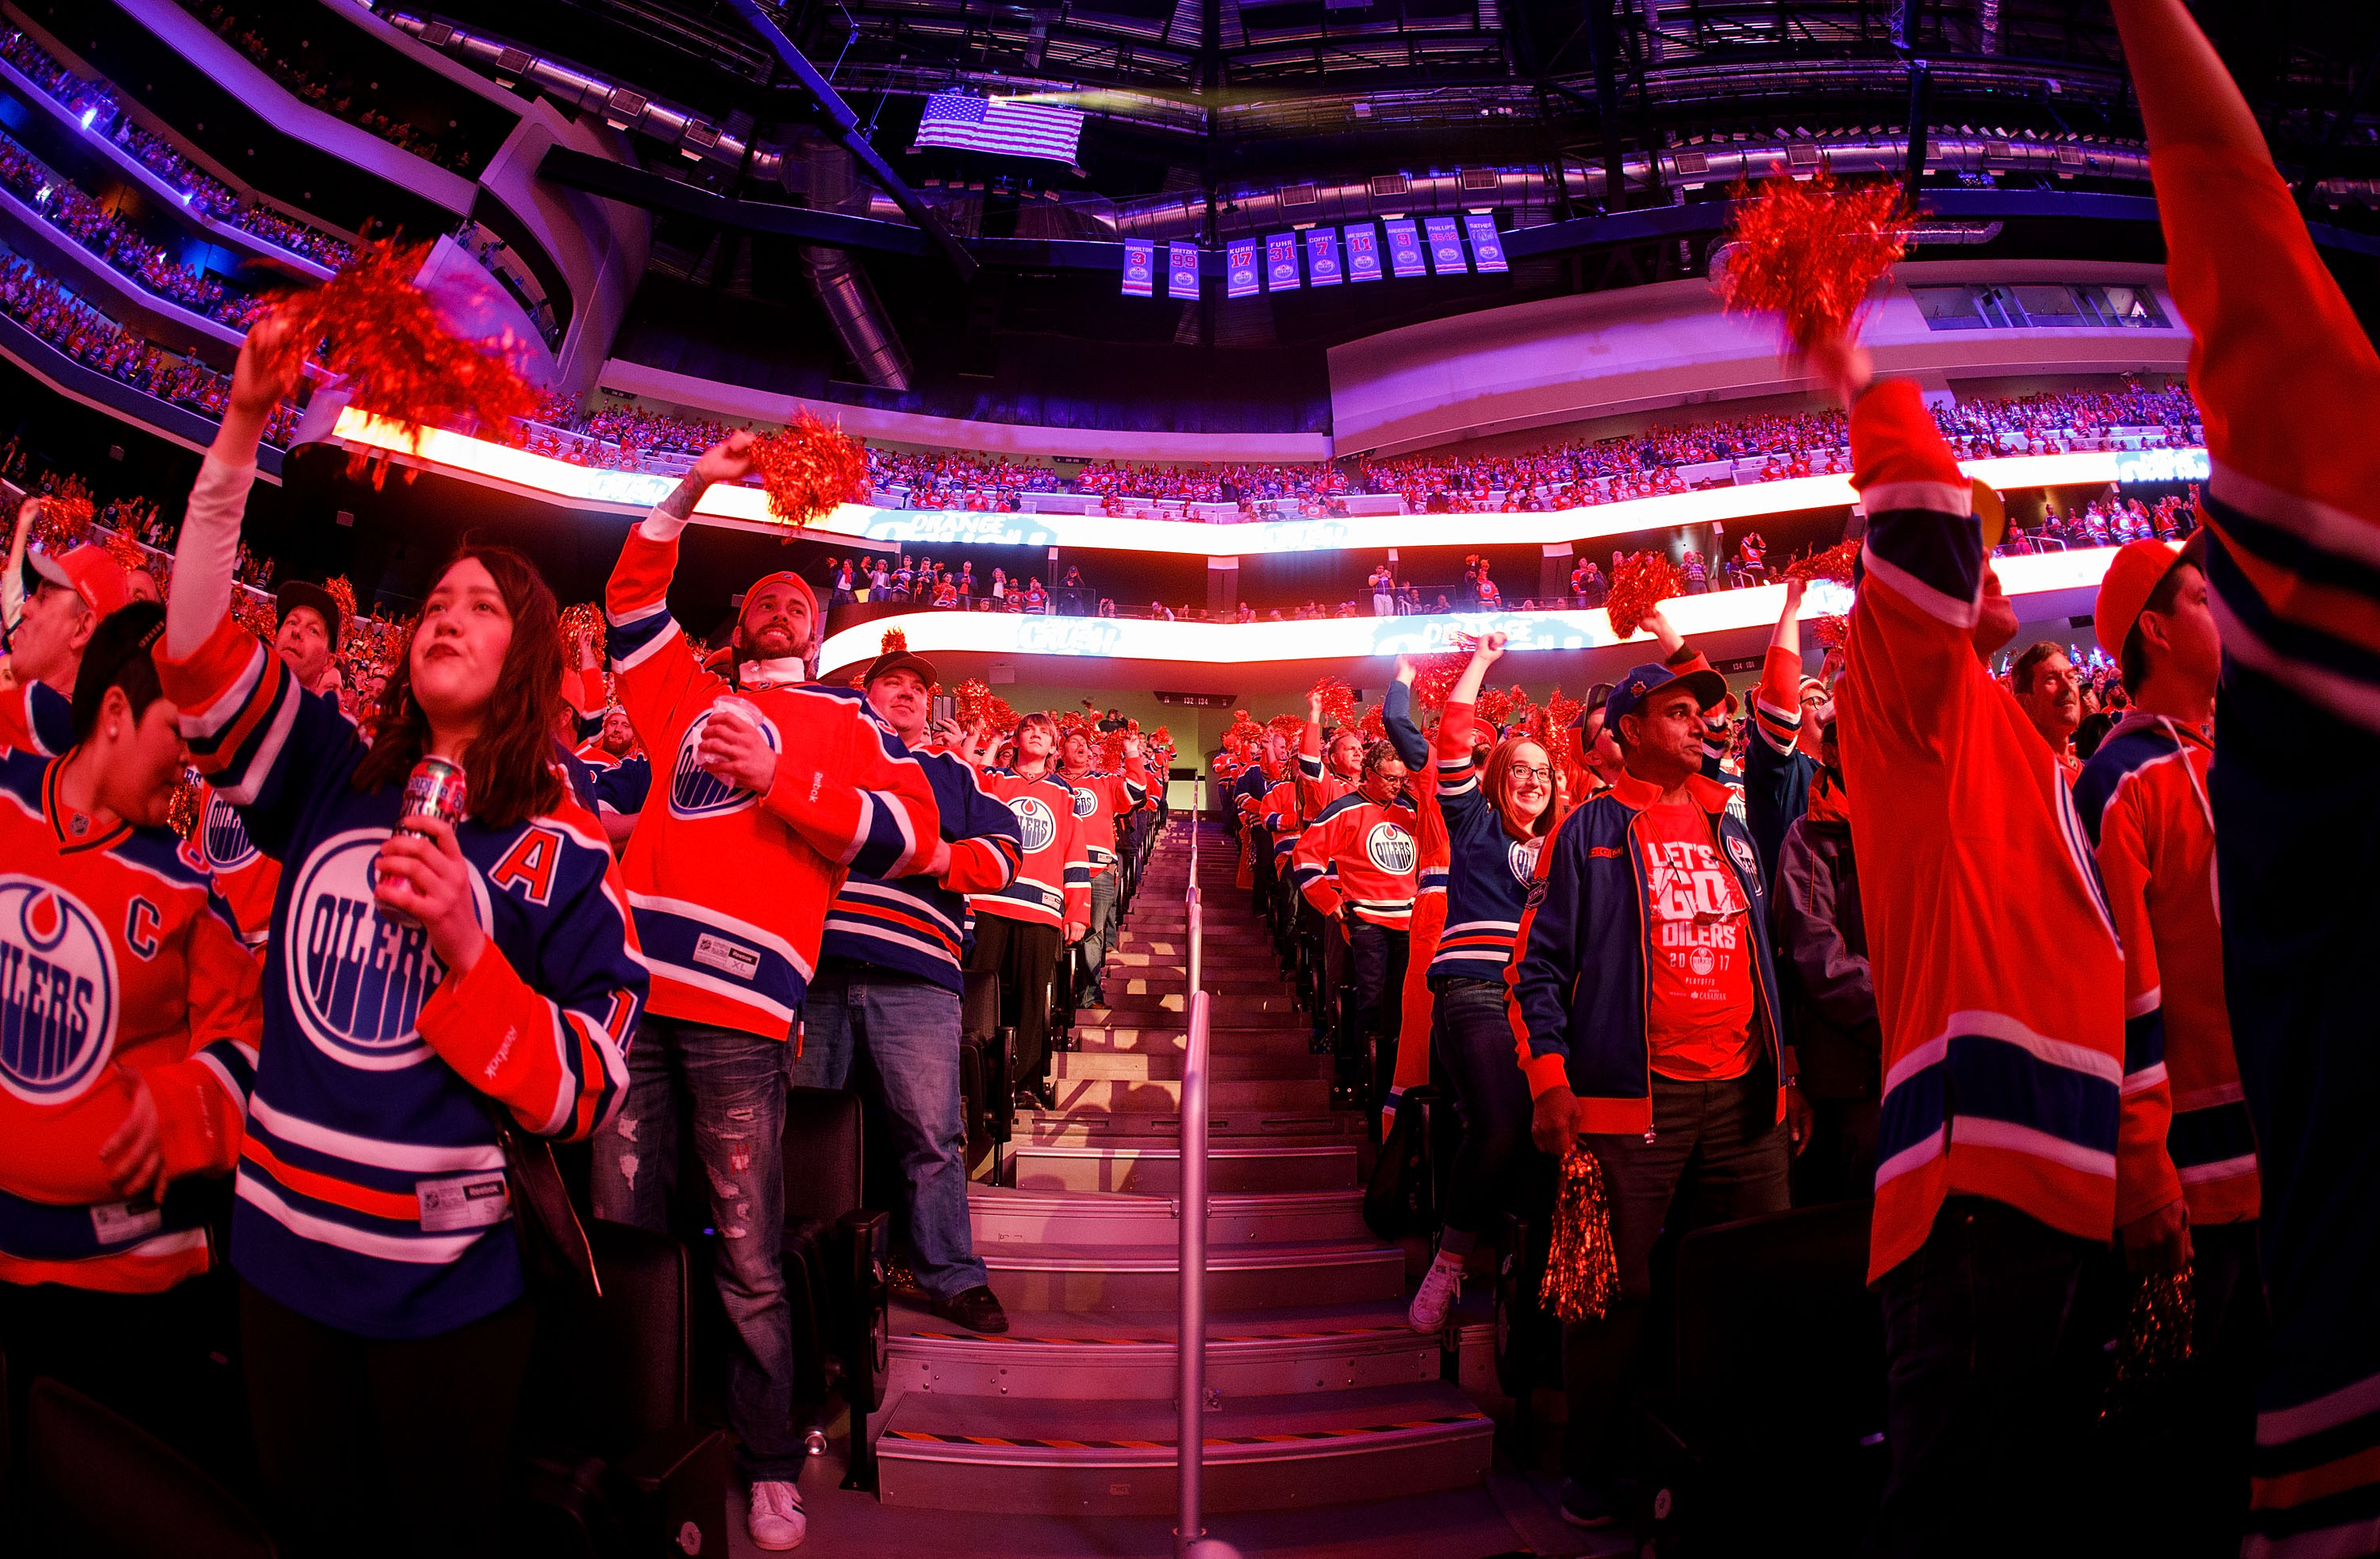 EDMONTON, AB - APRIL 12: Edmonton Oilers fans cheer on their team against the San Jose Sharks in Game One of the Western Conference First Round during the 2017 NHL Stanley Cup Playoffs at Rogers Place on April 12, 2017 in Edmonton, Alberta, Canada. (Photo by Codie McLachlan/Getty Images)